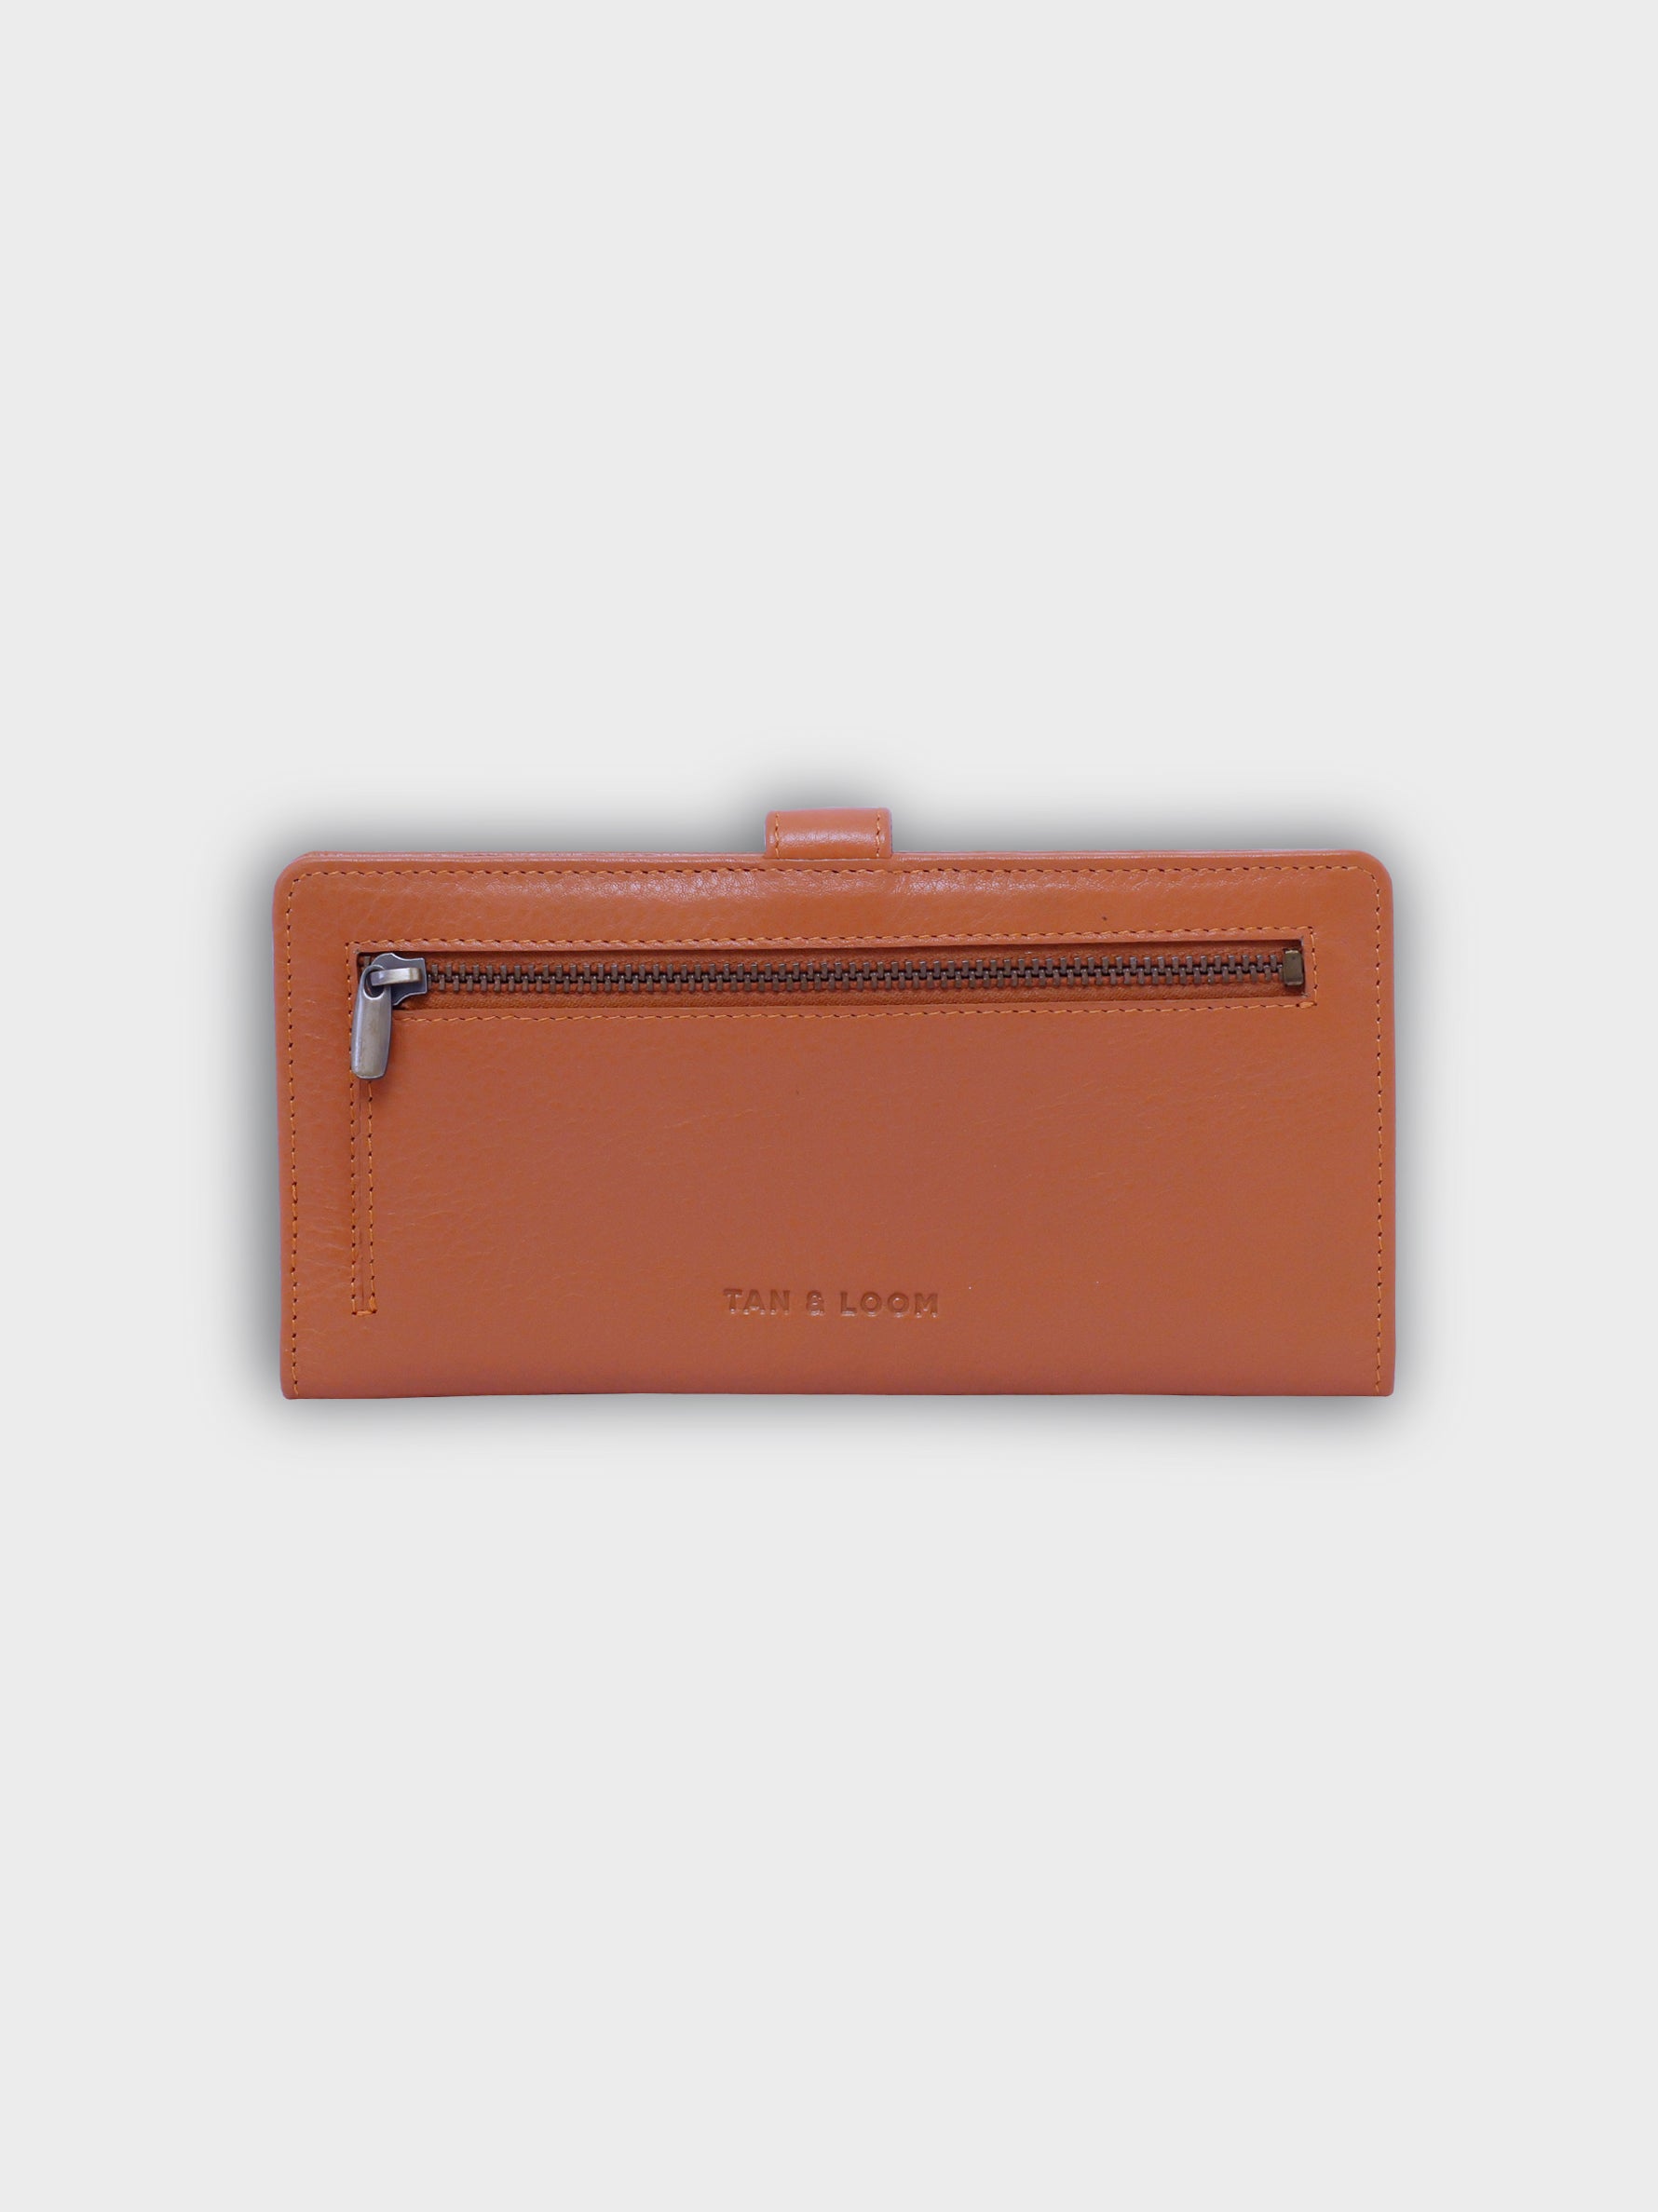 Handcrafted Genuine Vegetable Tanned Leather Twiggy Wallet Dusty Peach for Women Tan & Loom